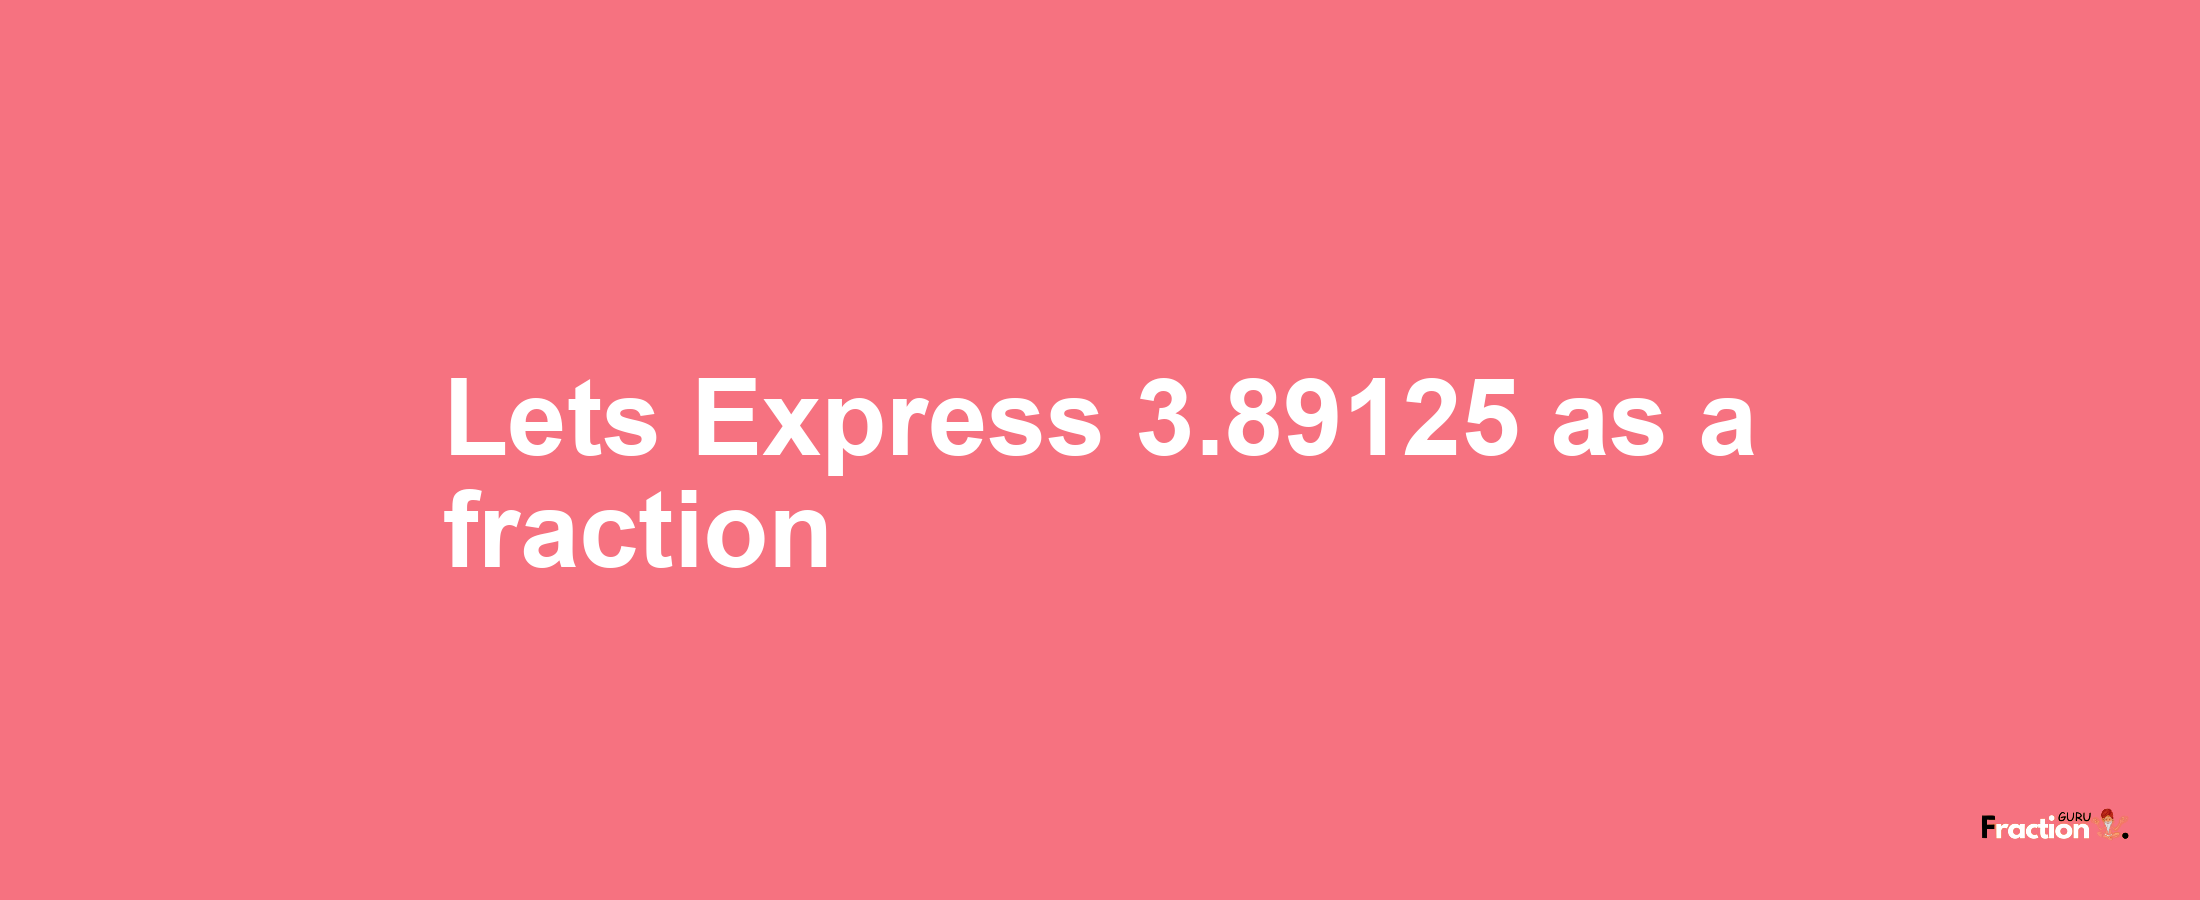 Lets Express 3.89125 as afraction